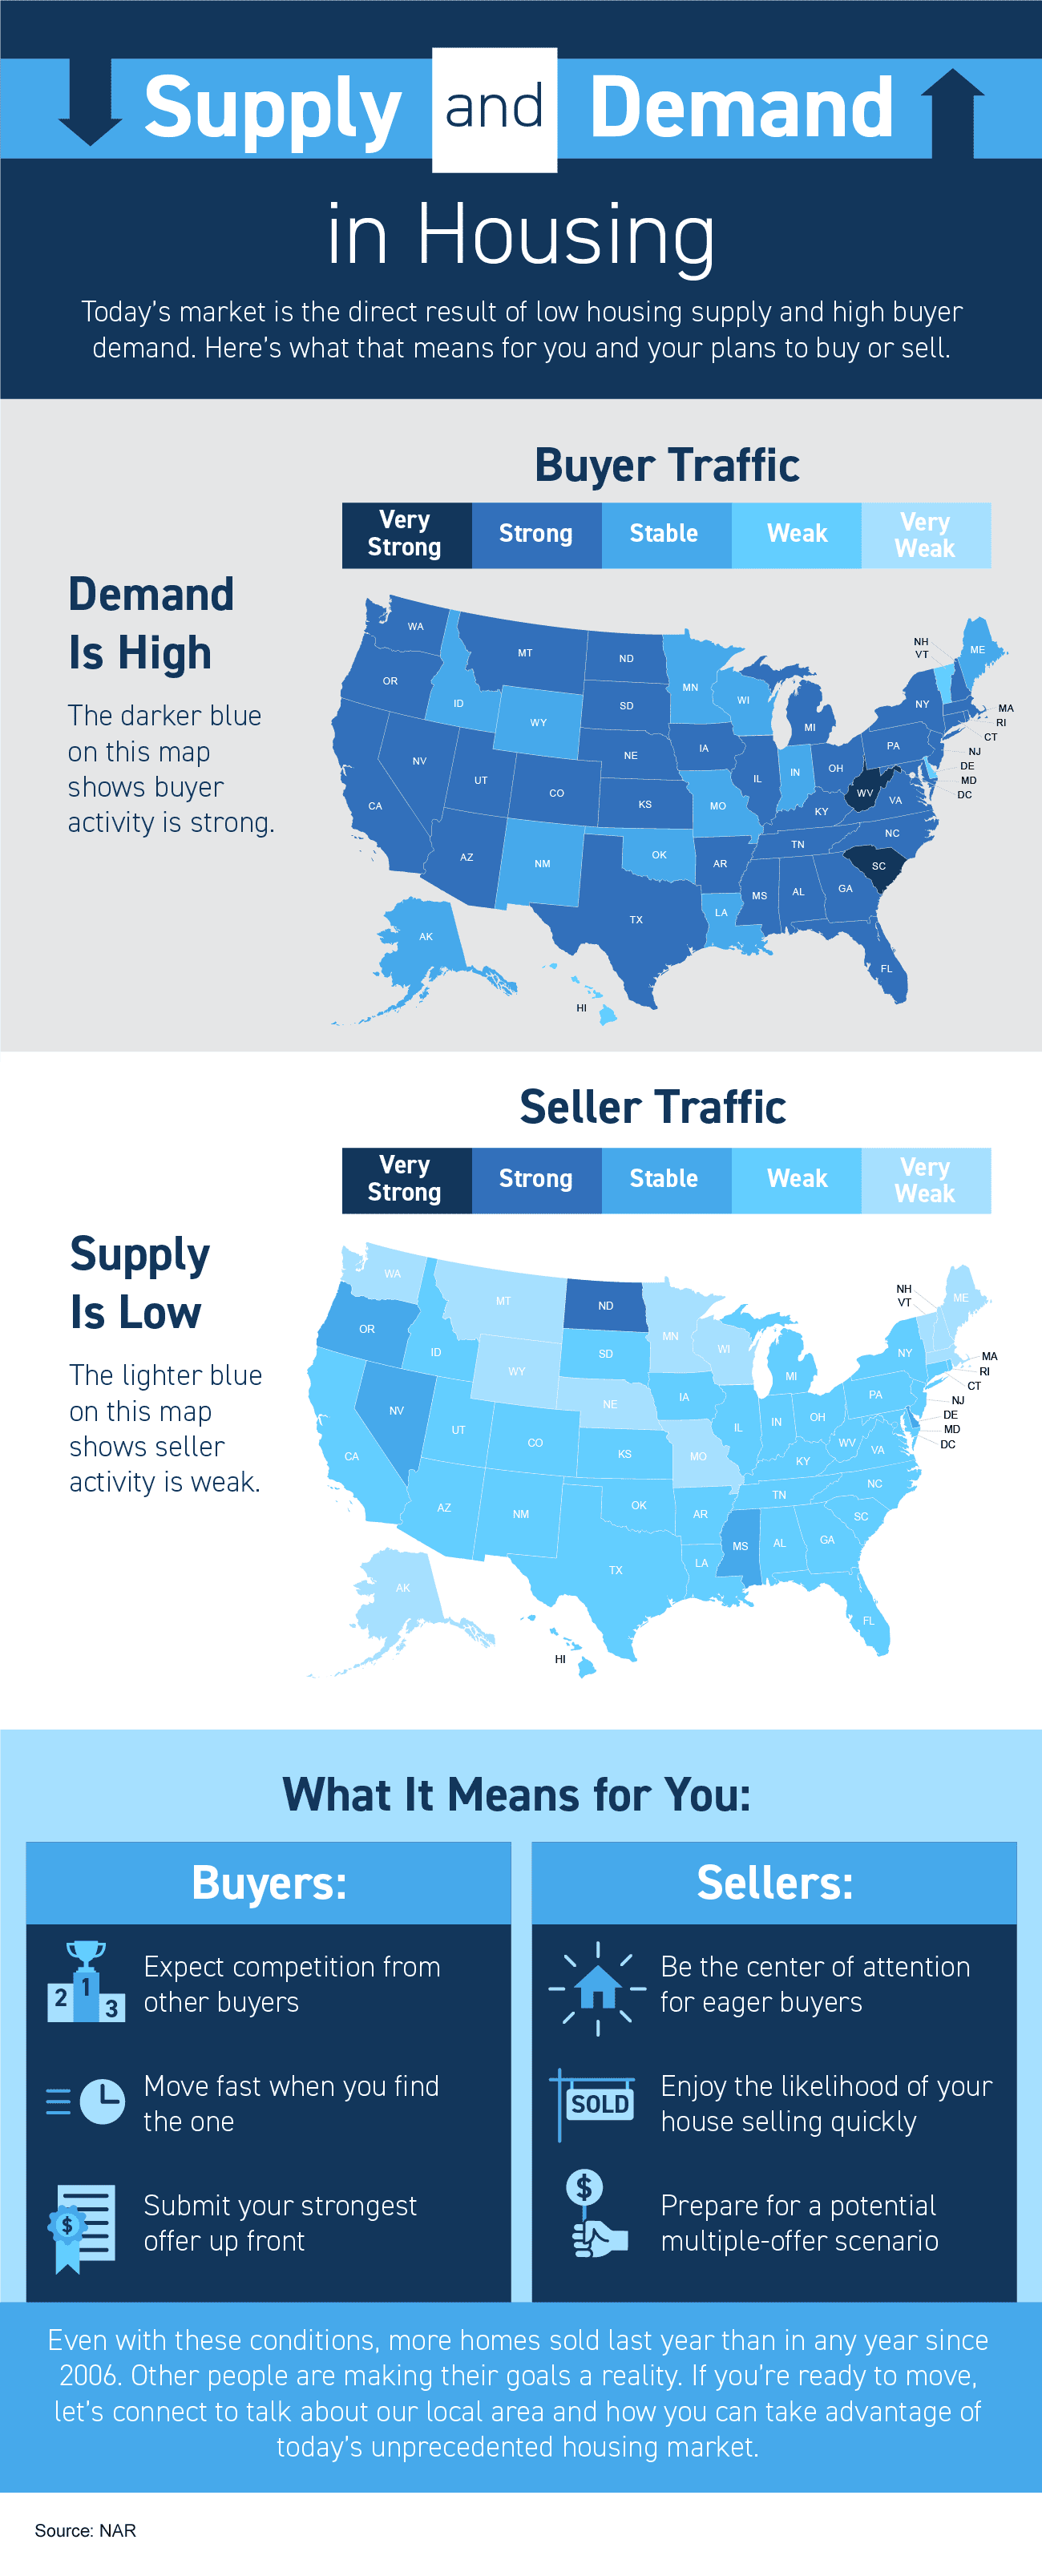 Supply and Demand in Housing INFOGRAPHIC